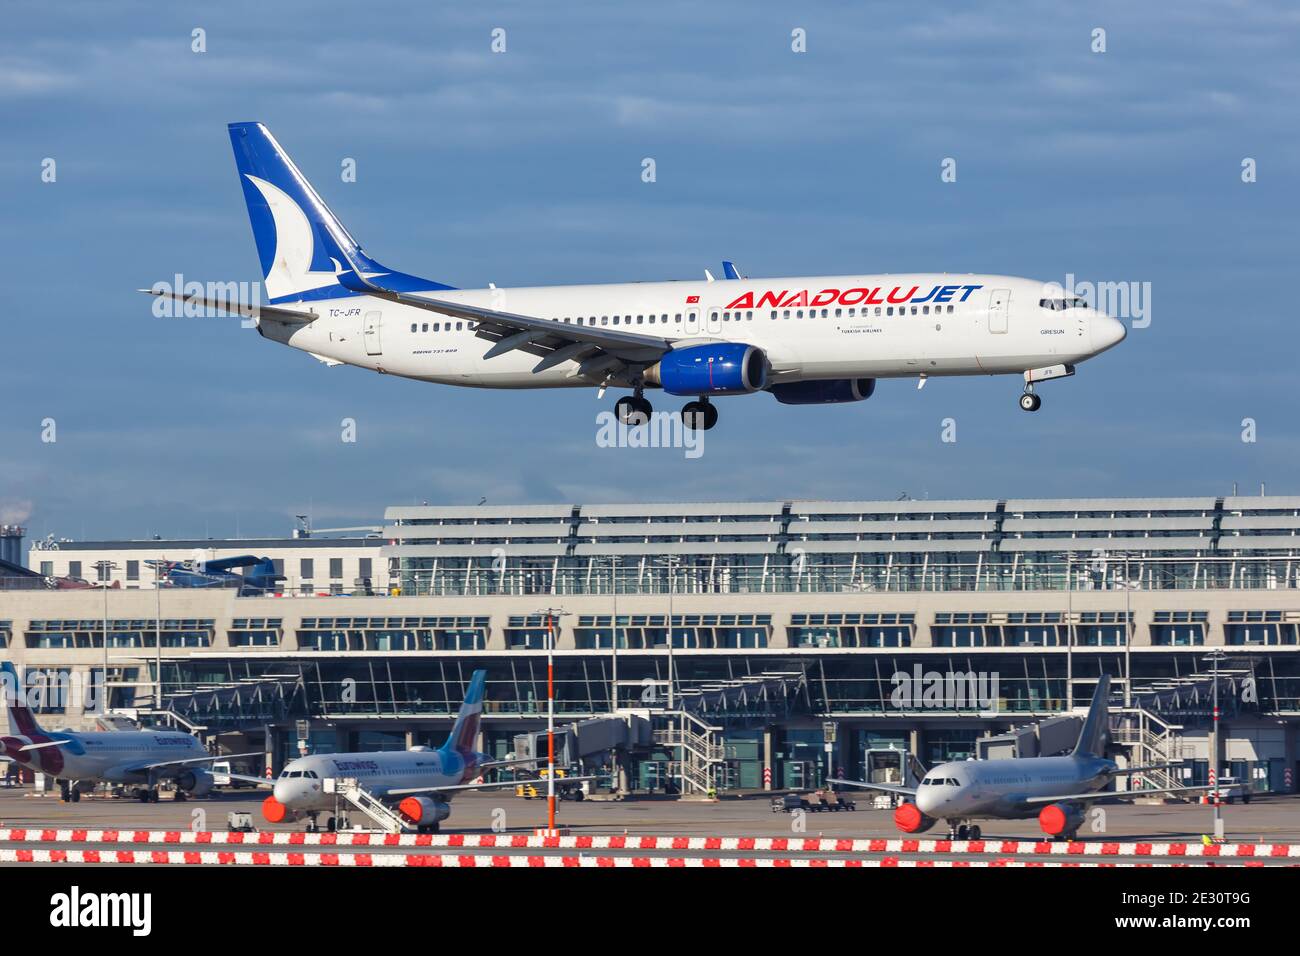 Stuttgart, Germany - December 19, 2020: AnadoluJet Boeing 737-800 airplane at Stuttgart Airport (STR) in Germany. Boeing is an American aircraft manuf Stock Photo